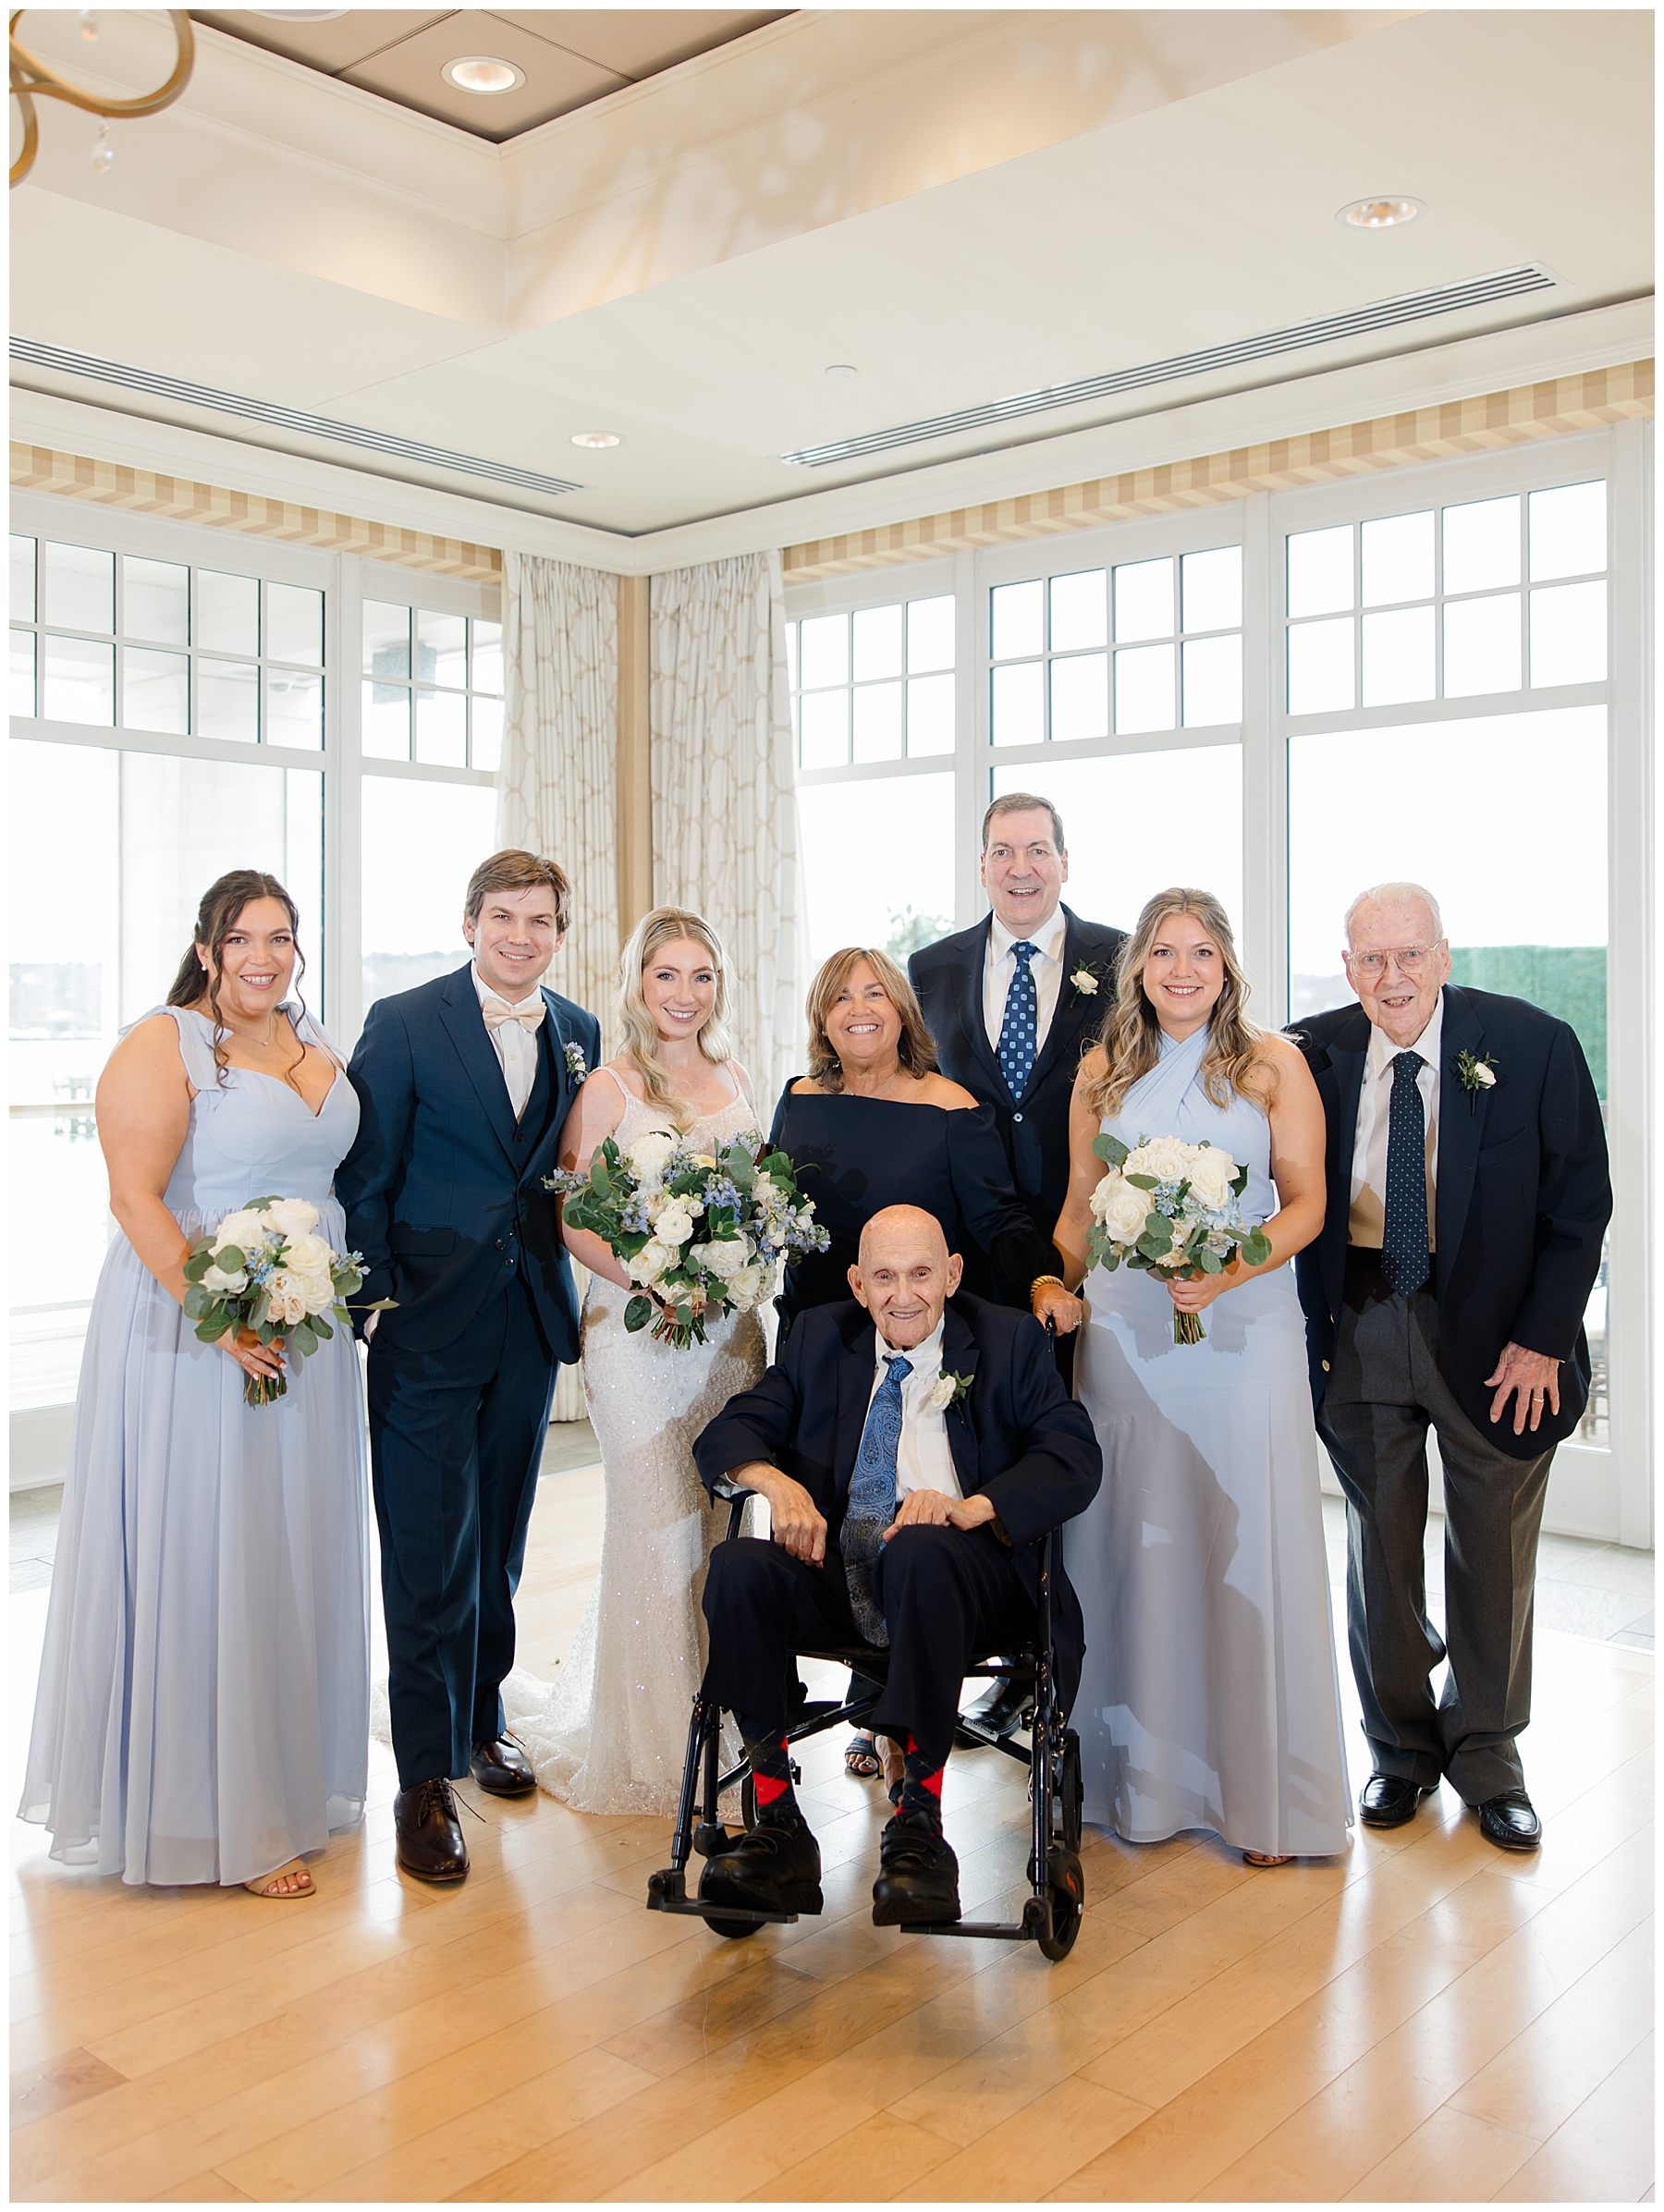 family portraits from Oceanside Wedding at Beauport Hotel in Gloucester, MA